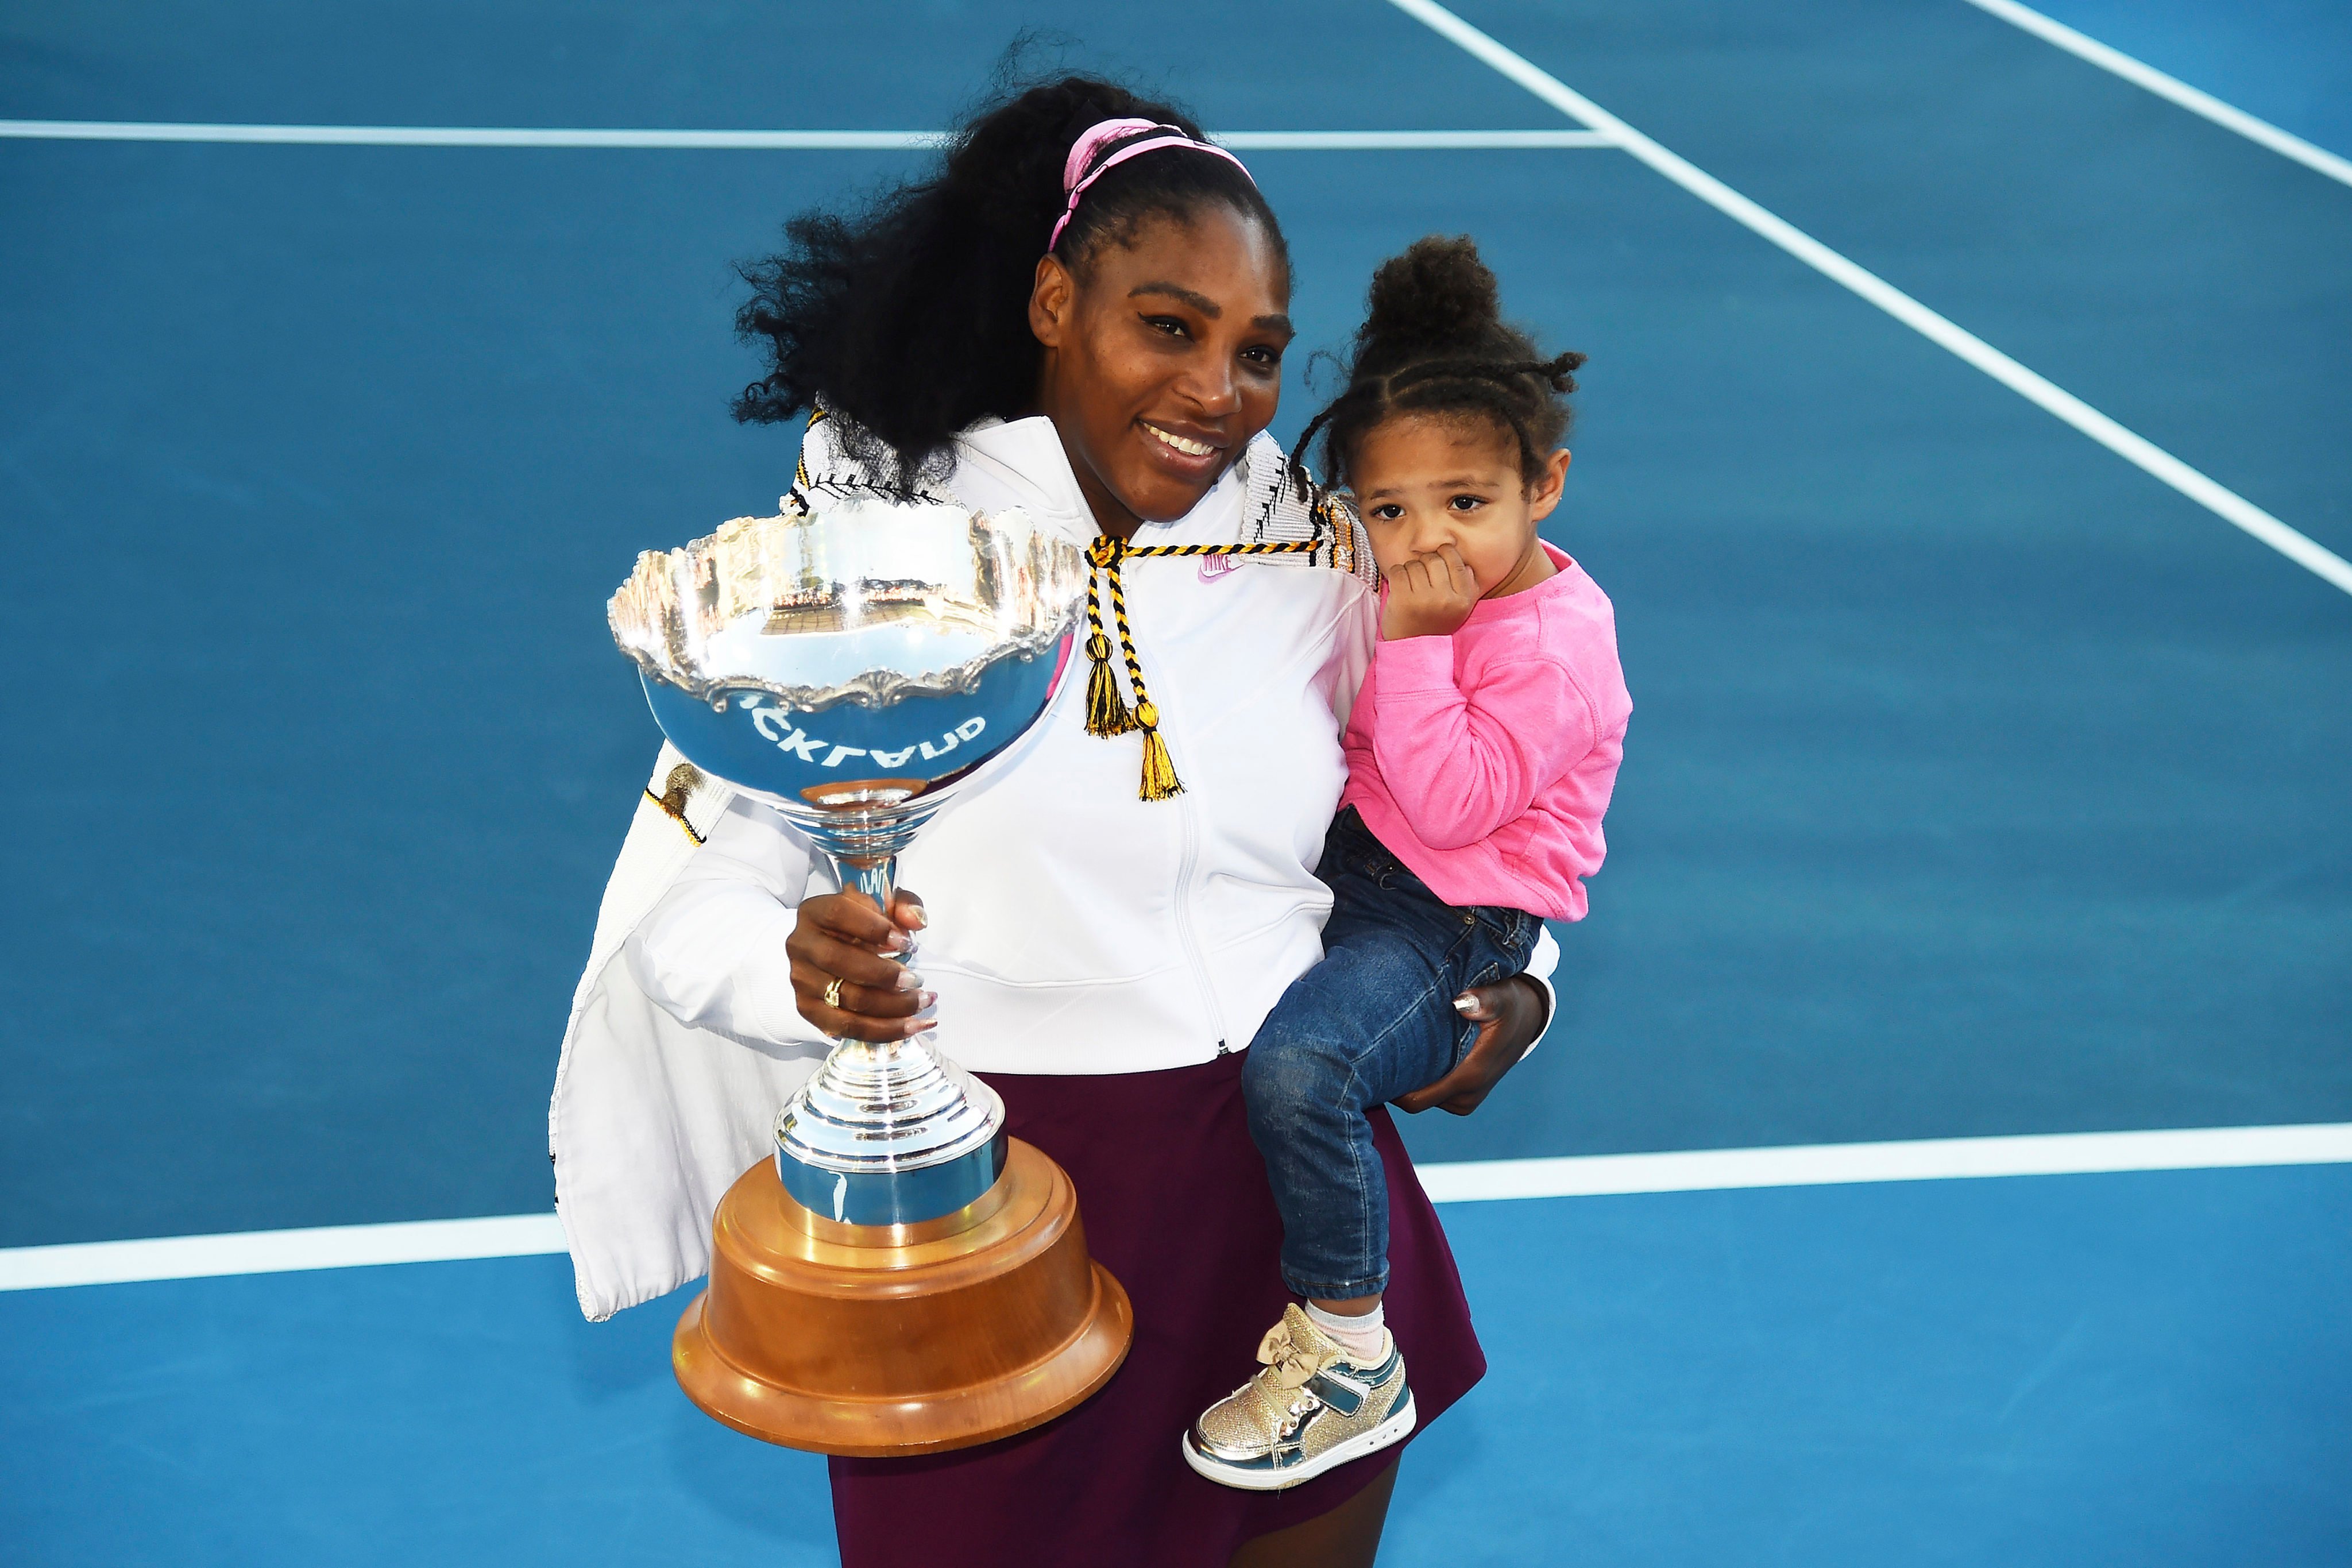 Serena Williams, pictured with her daughter Alexis Olympia Ohanian Jr. after the ASB Classic in Auckland, New Zealand, in January 2020, has said she is ready to step away from tennis after winning 23 grand slam titles, turning her focus to having another child and her business interests. Photo: Photosport via AP